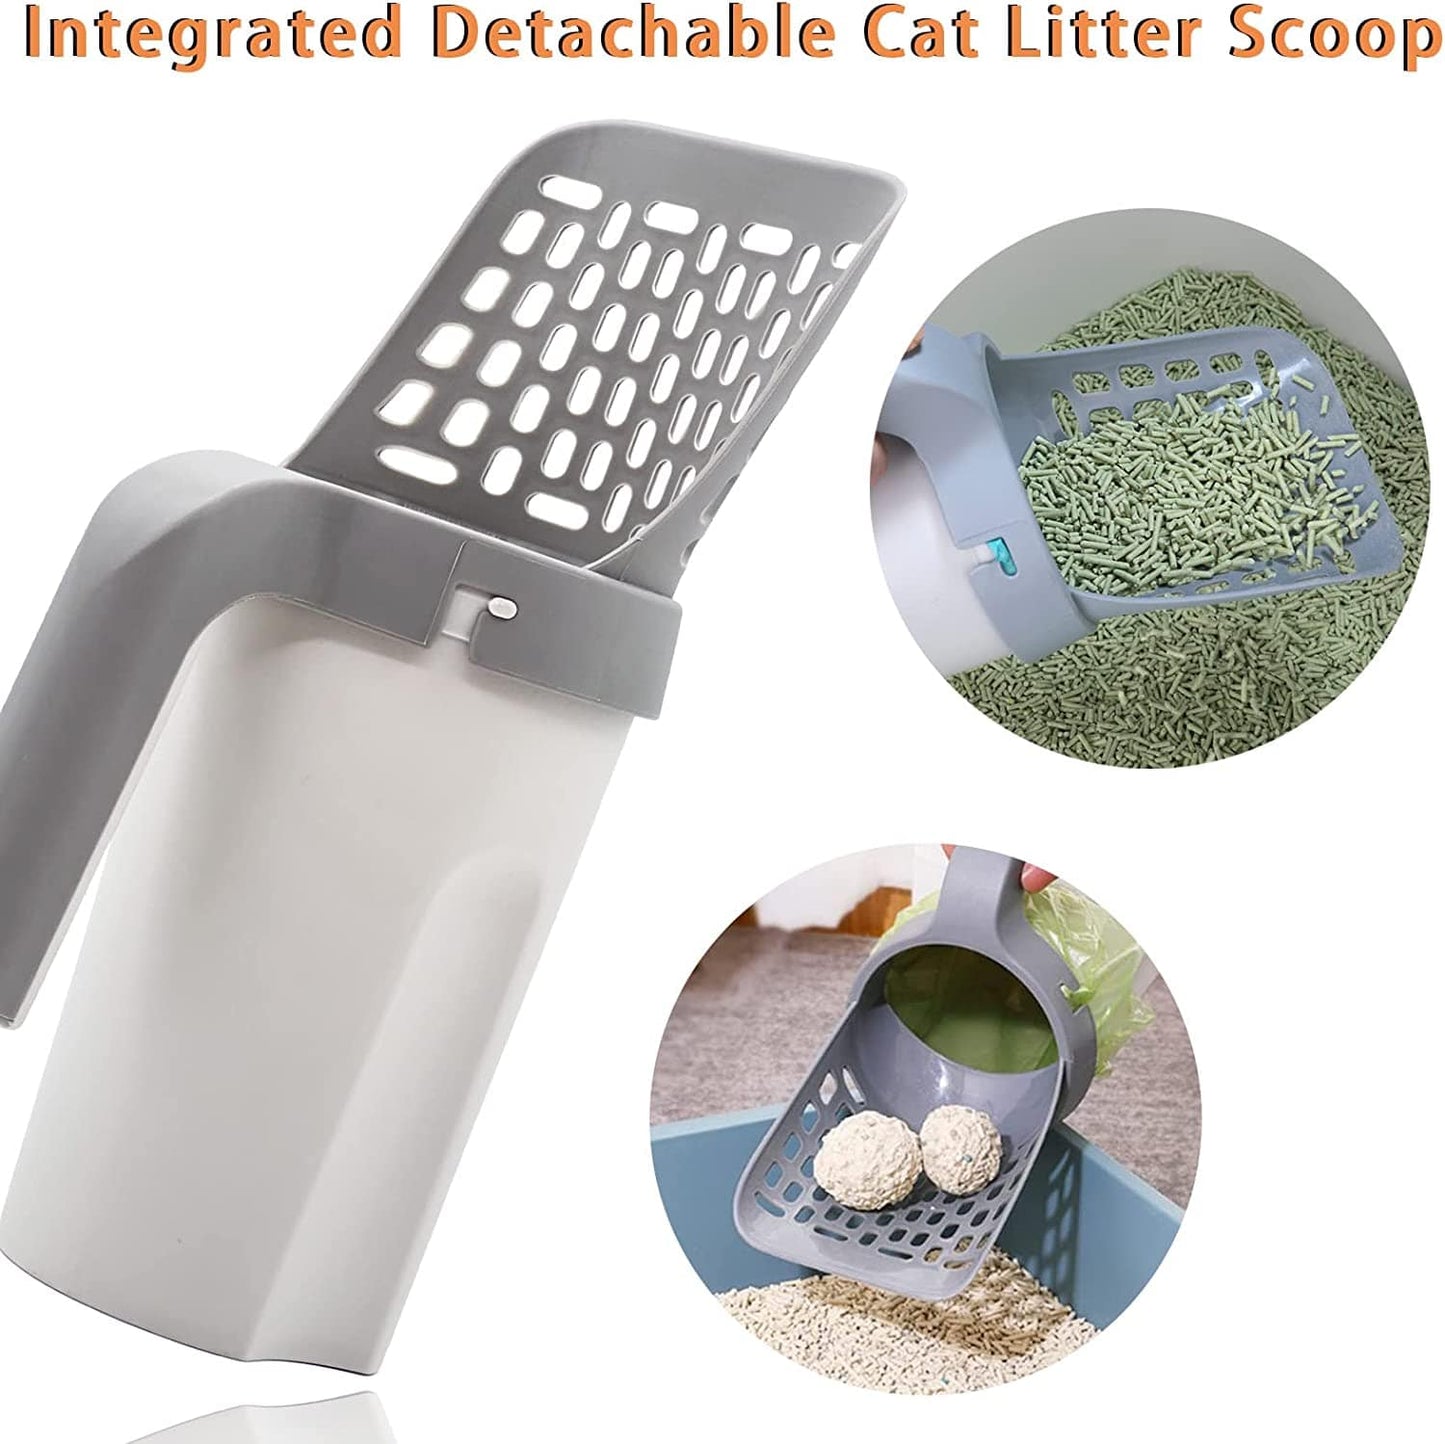 Affordable and durable cat litter shovel scoop